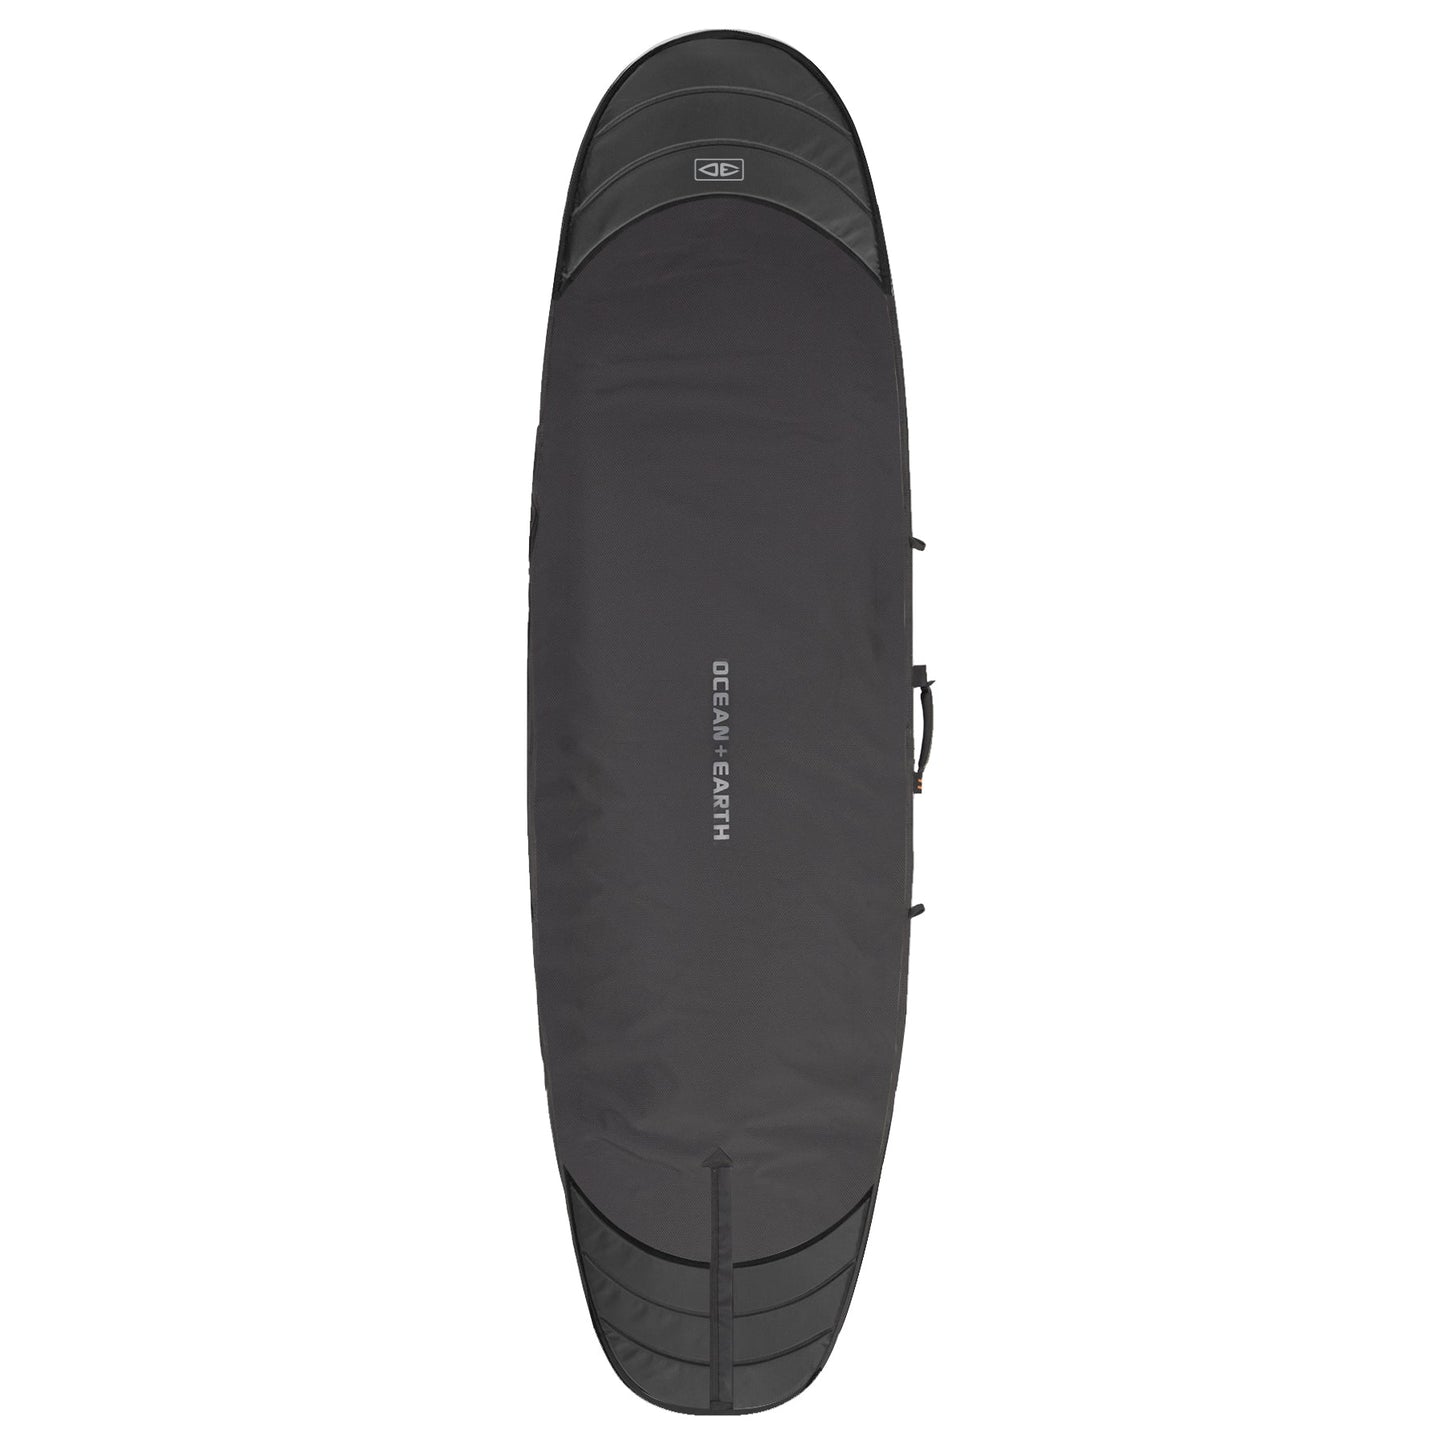 Double-Hypa-Fish-Shortboard-Travel-Coffin-Cover-Specifications-features-galway-ireland-blacksheepsurfco-side